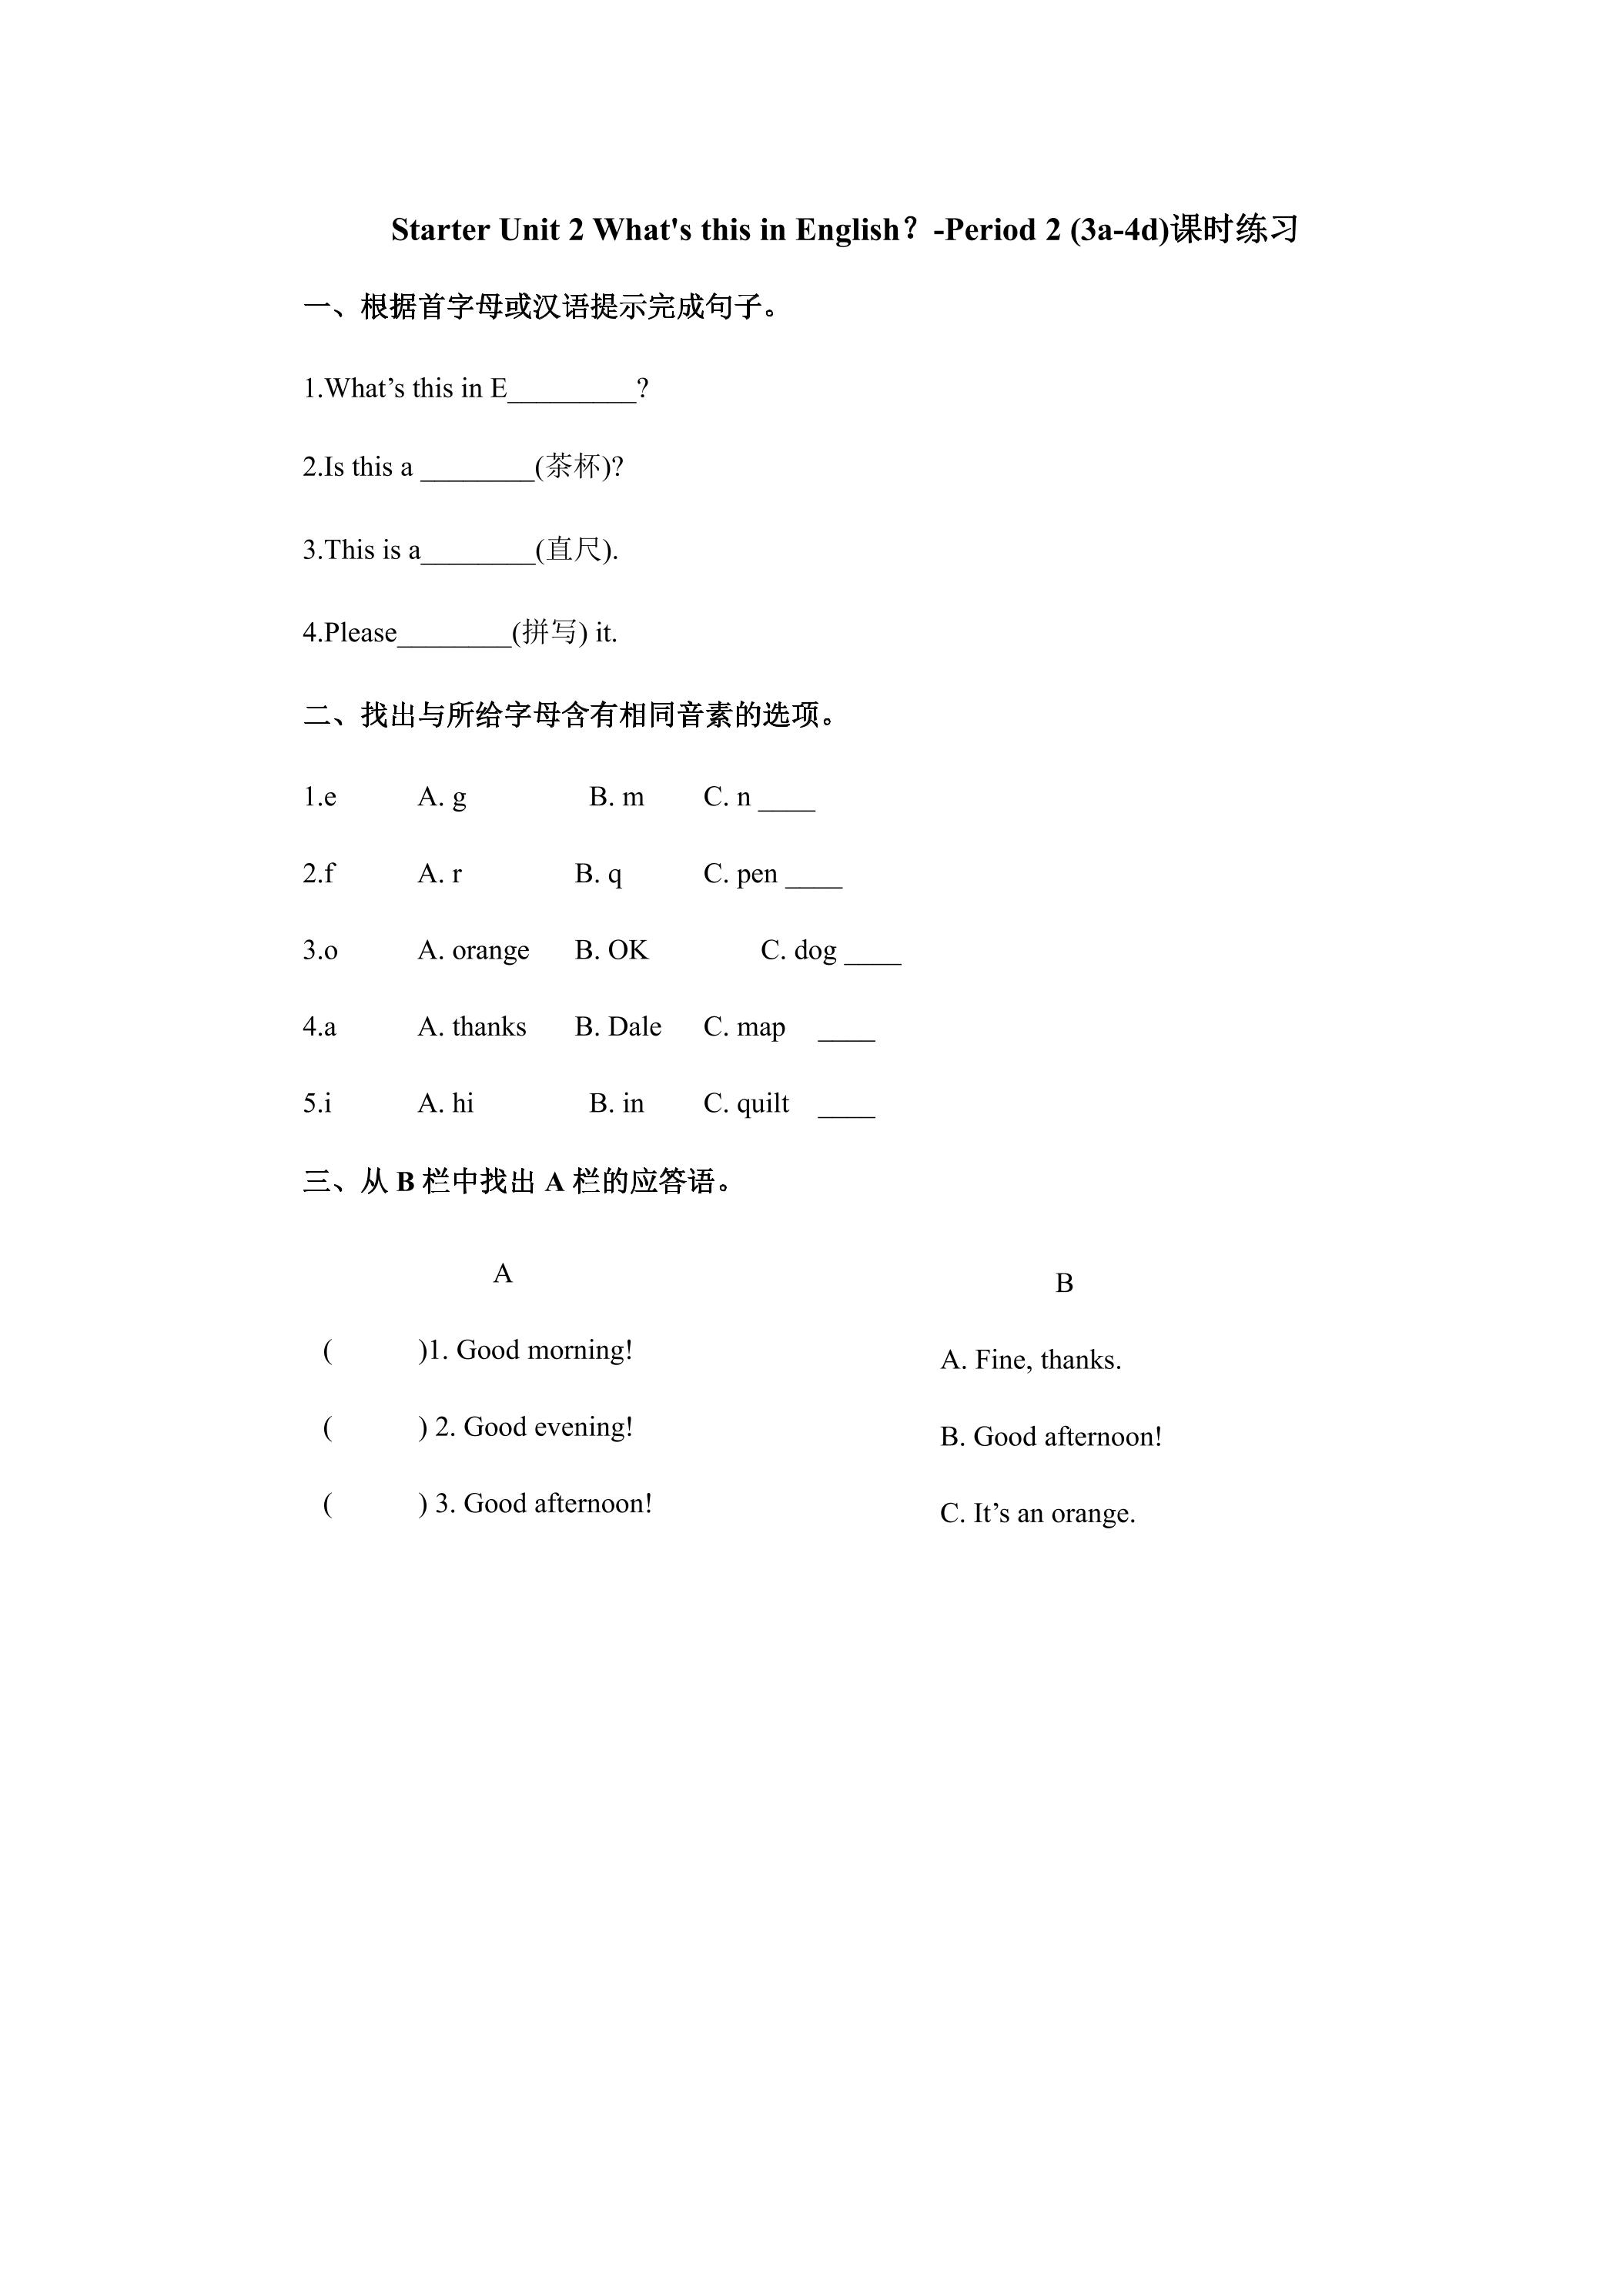 Starter Unit 2 What's this in English？-Period 2 (3a-4d)课时练习